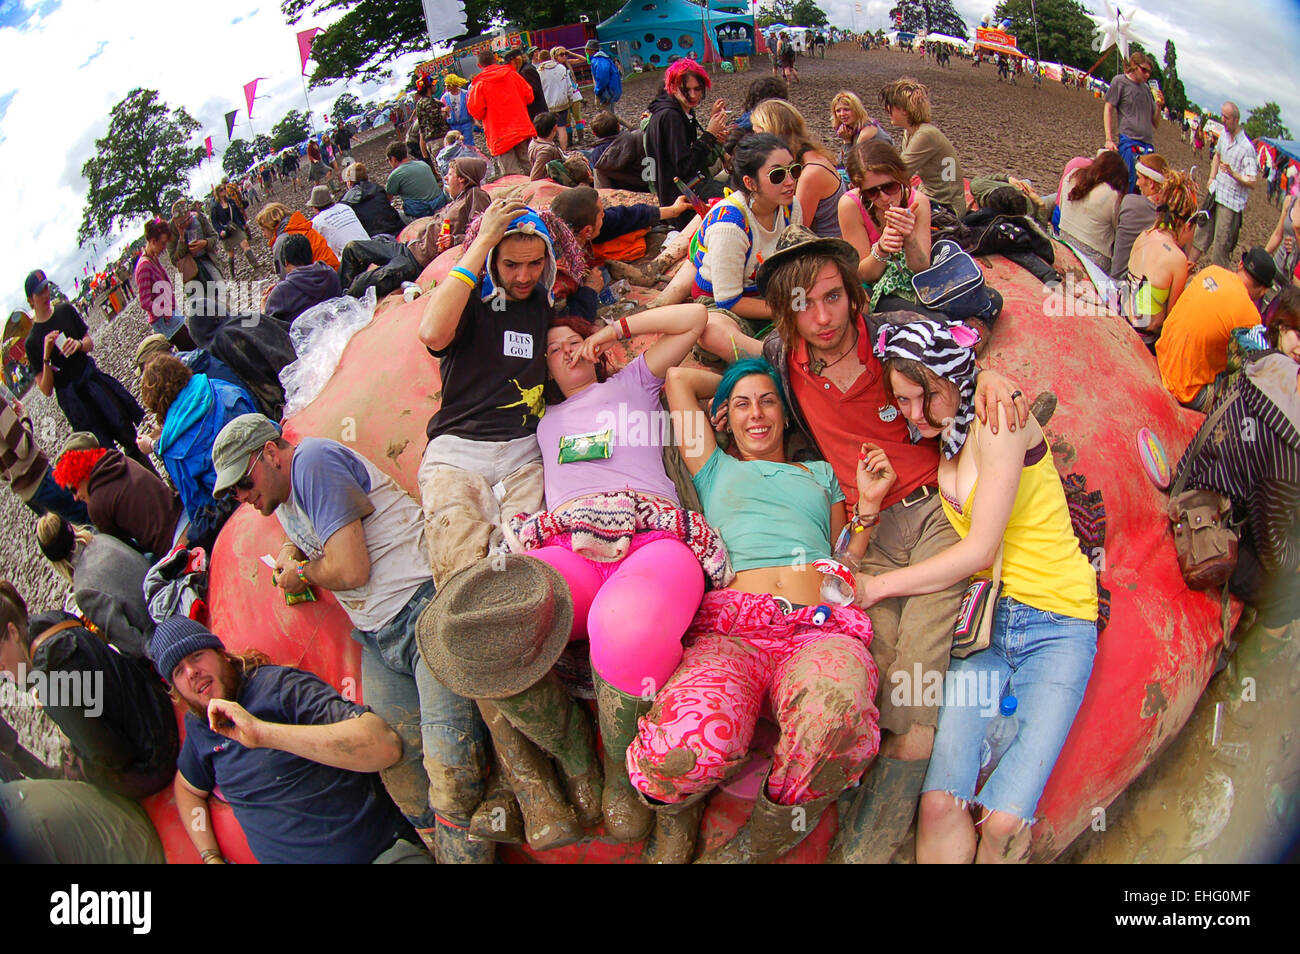 Mates hanging out in Glade Festival. Stockfoto